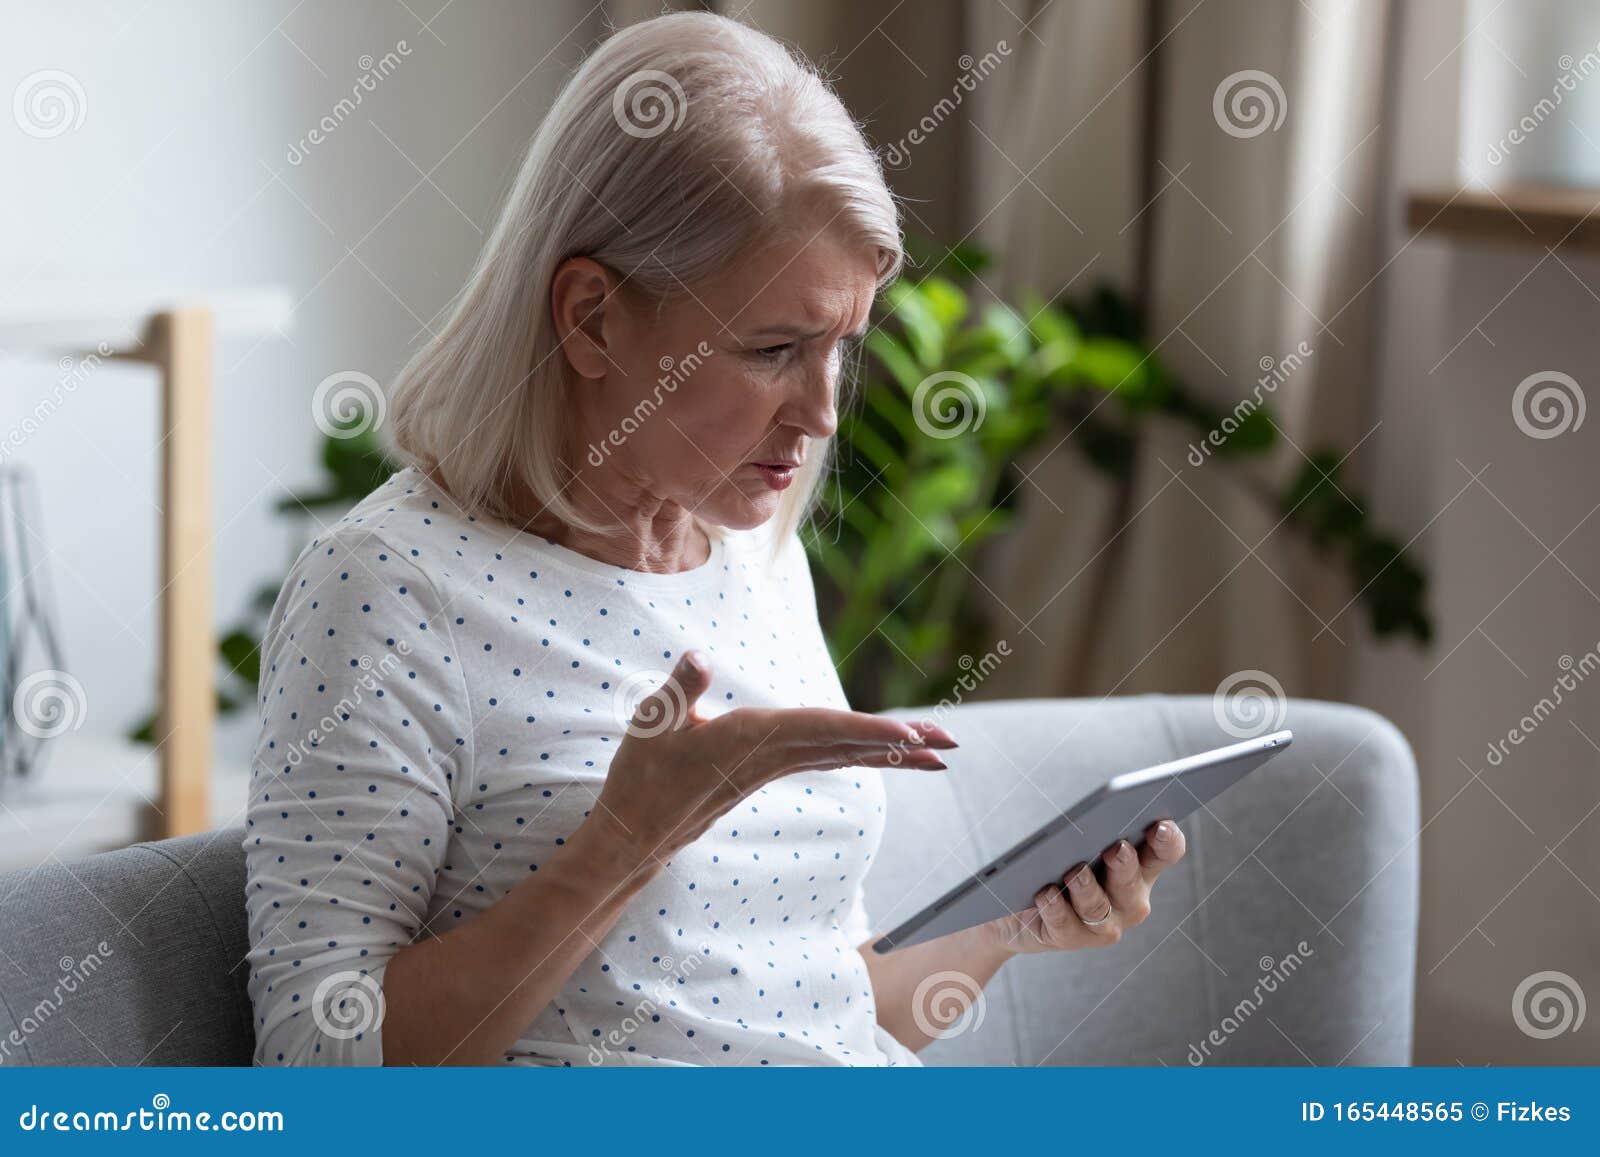 irritated aged woman holding broken tablet having problems with gadget